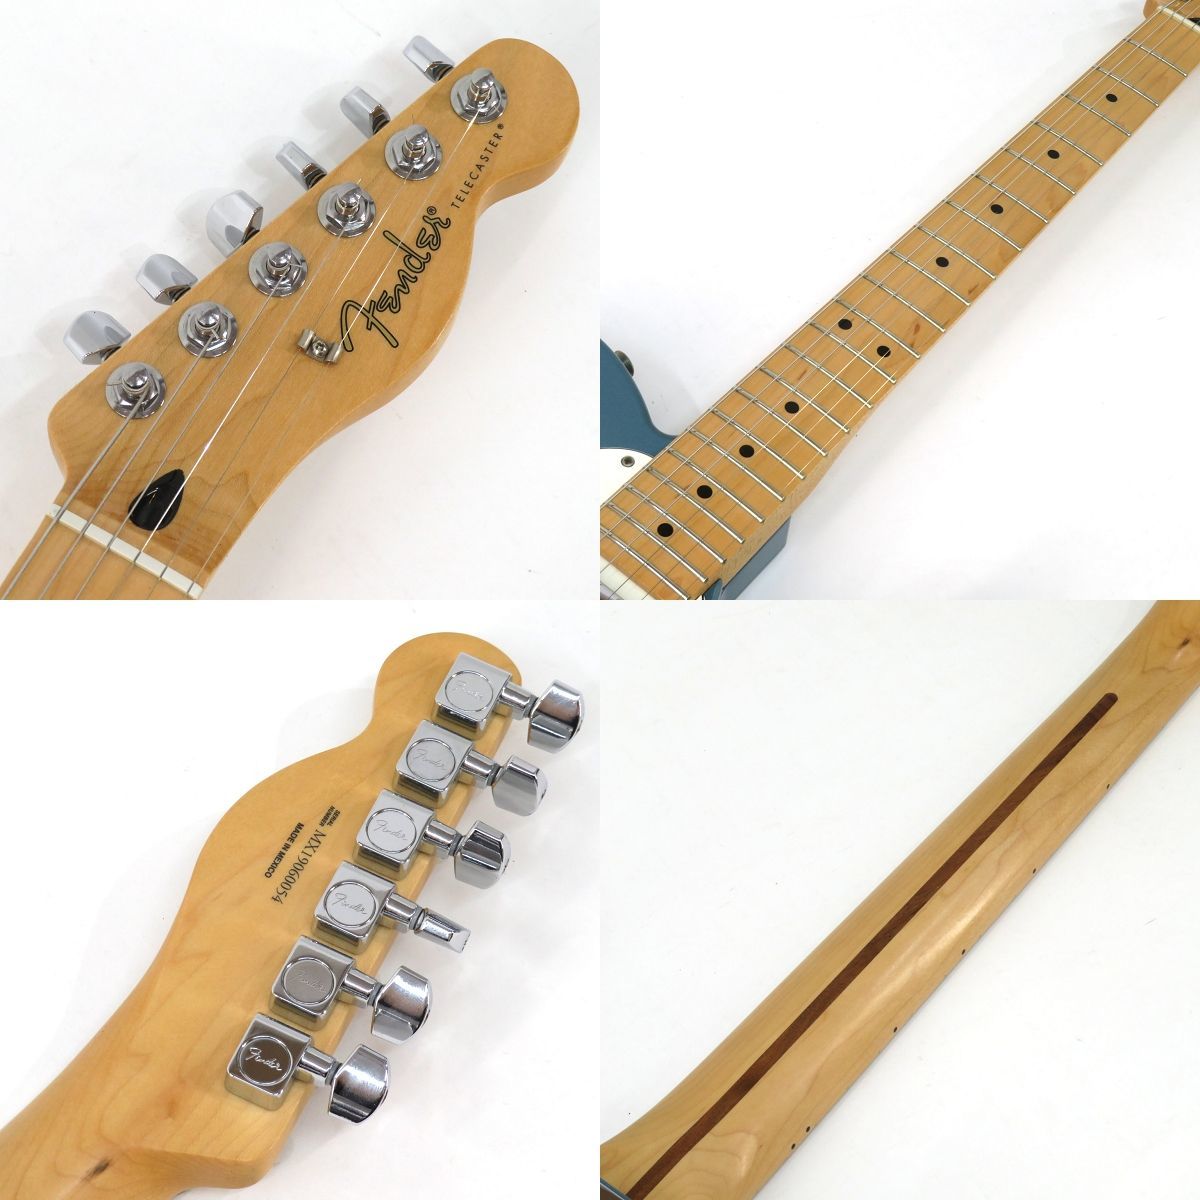 092s☆Fender Mexico フェンダーメキシコ Player | JChere雅虎拍卖代购